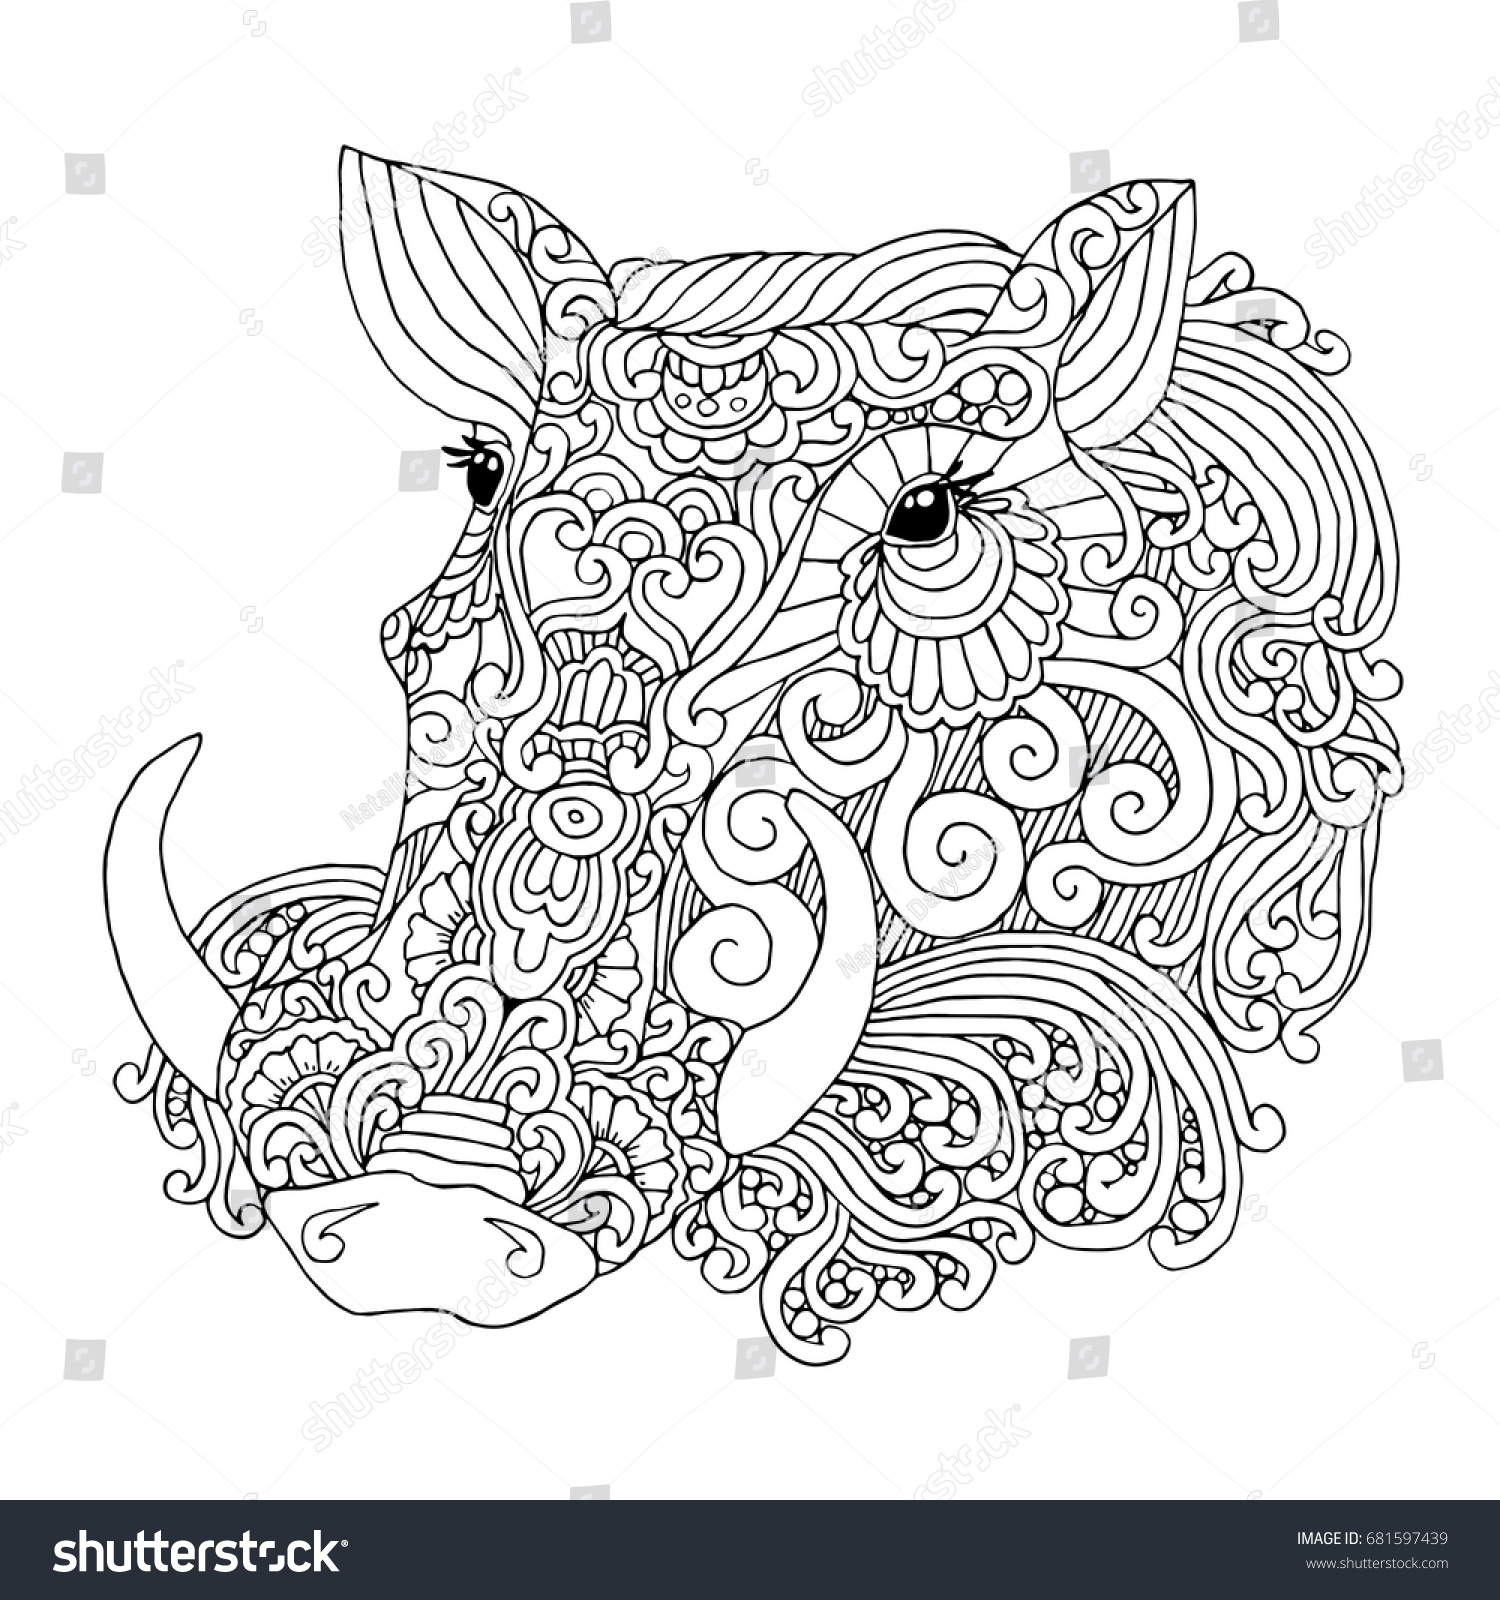 Download Common Warthog Boar Pig Head Isolated Stock Vector 681597439 - Shutterstock